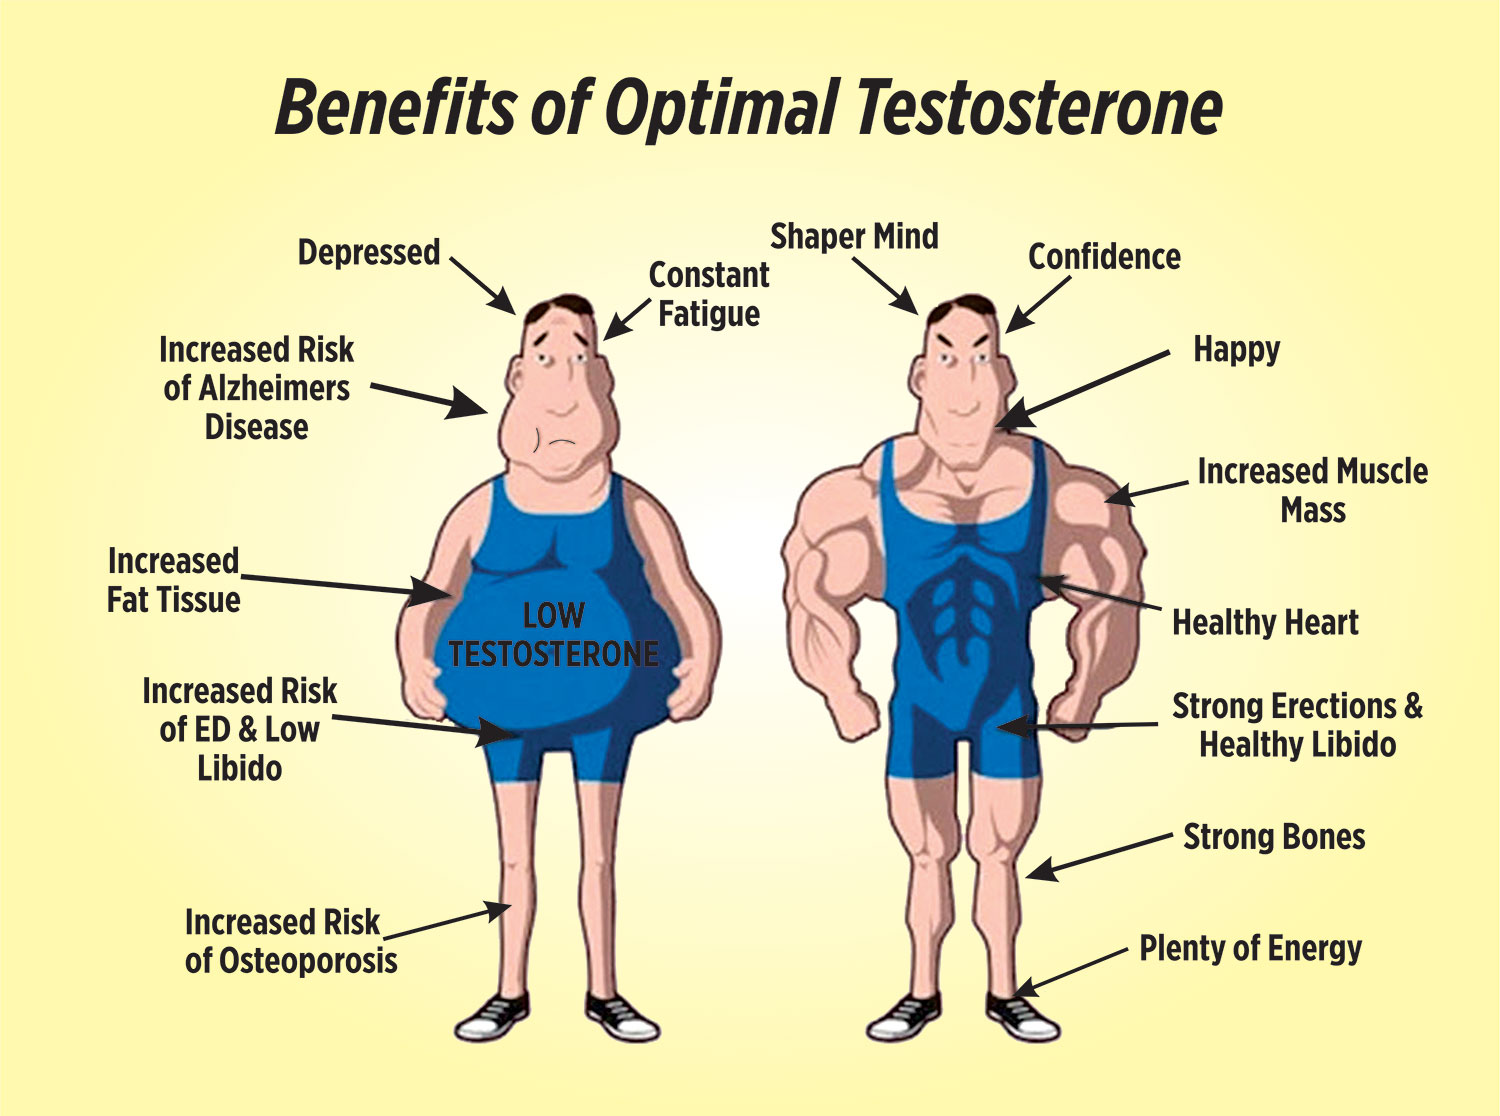 Does having more testosterome make your dick bigger